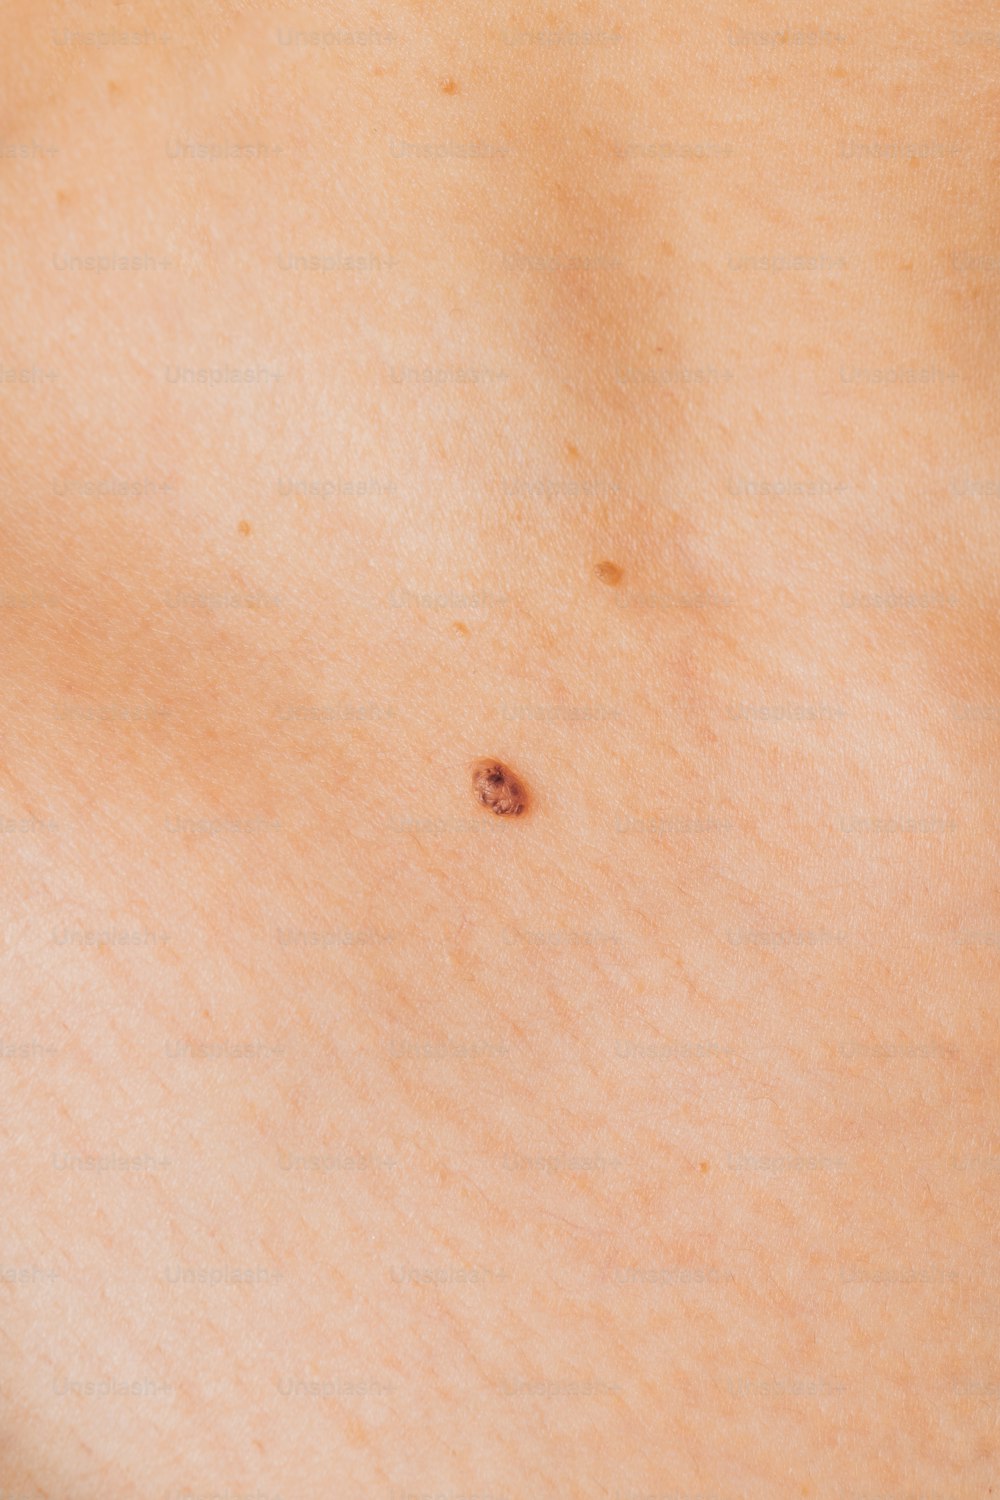 a close up of a person's stomach with a spot on it